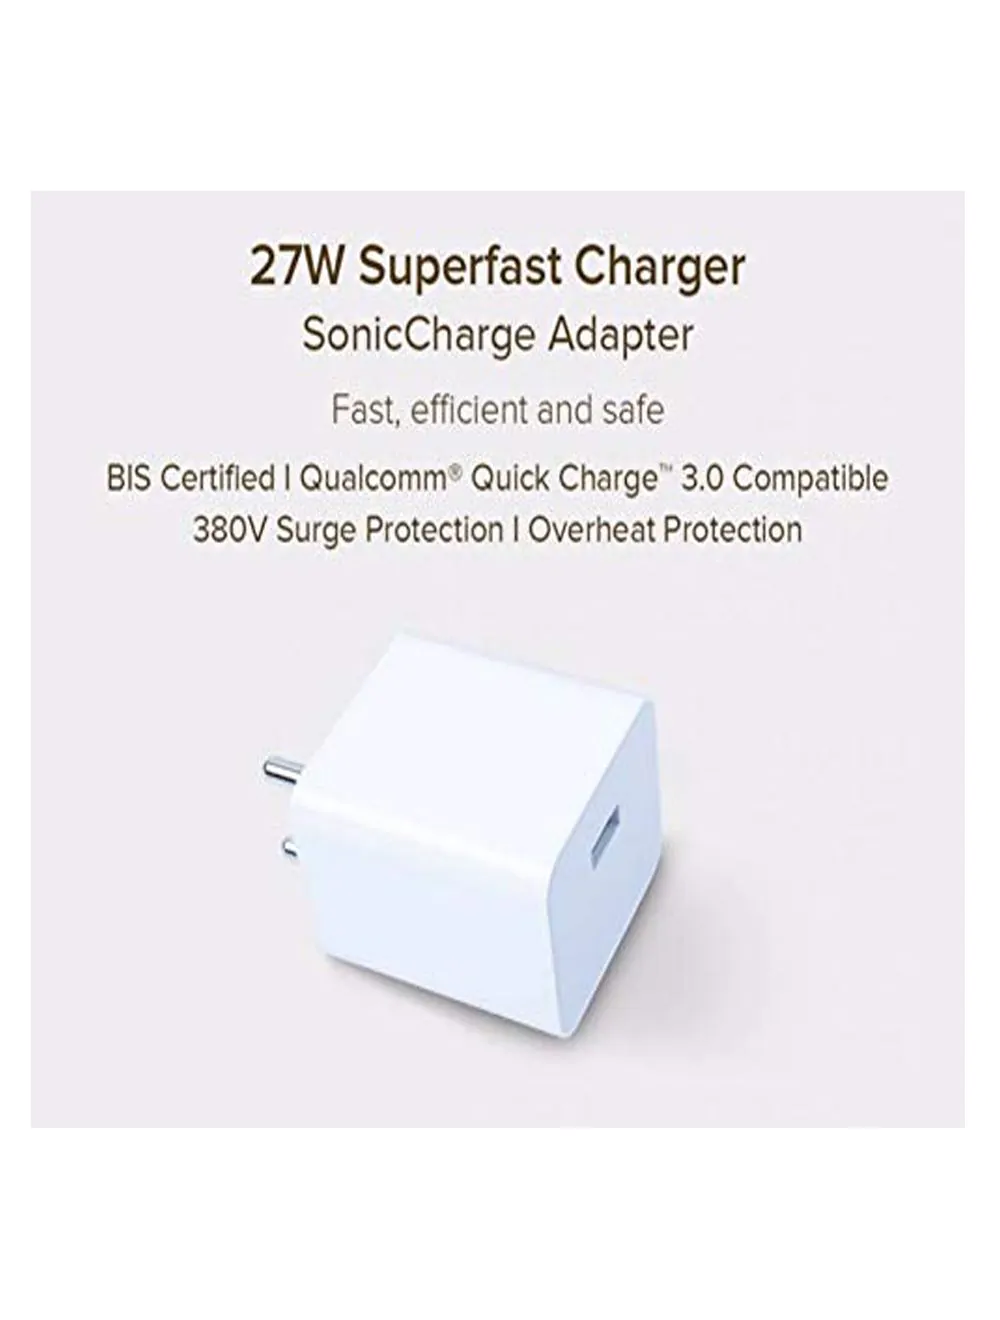 Mi 27W Superfast Charger (Sonic Charge Adapter)